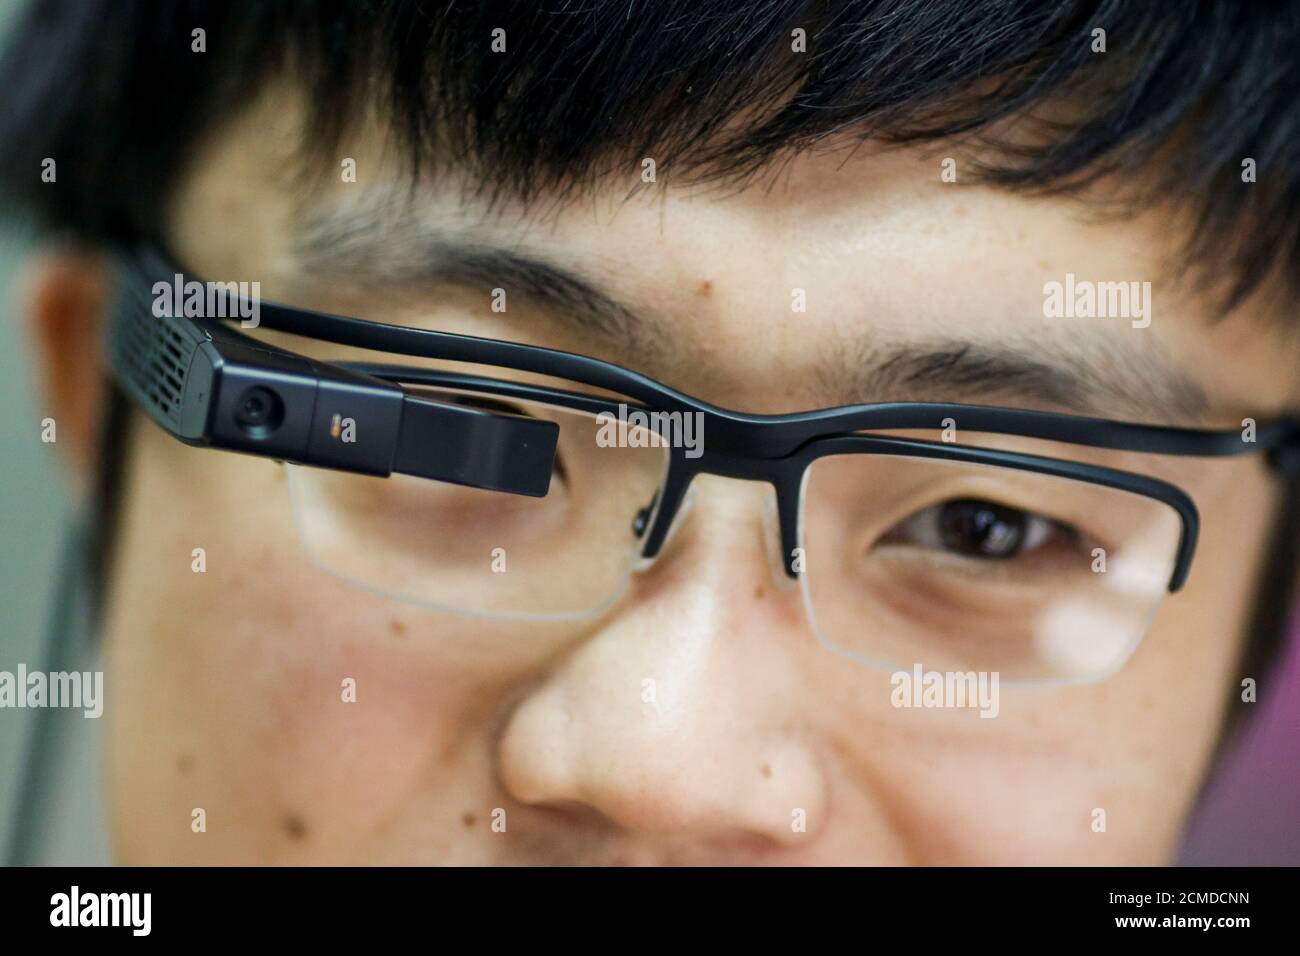 LLVision design director Tianyi Liu wears LLVision facial recognition smart  glasses as he demonstrates them at the company's office in Beijing, China  February 28, 2018. Picture taken February 28, 2018. REUTERS/Thomas Peter